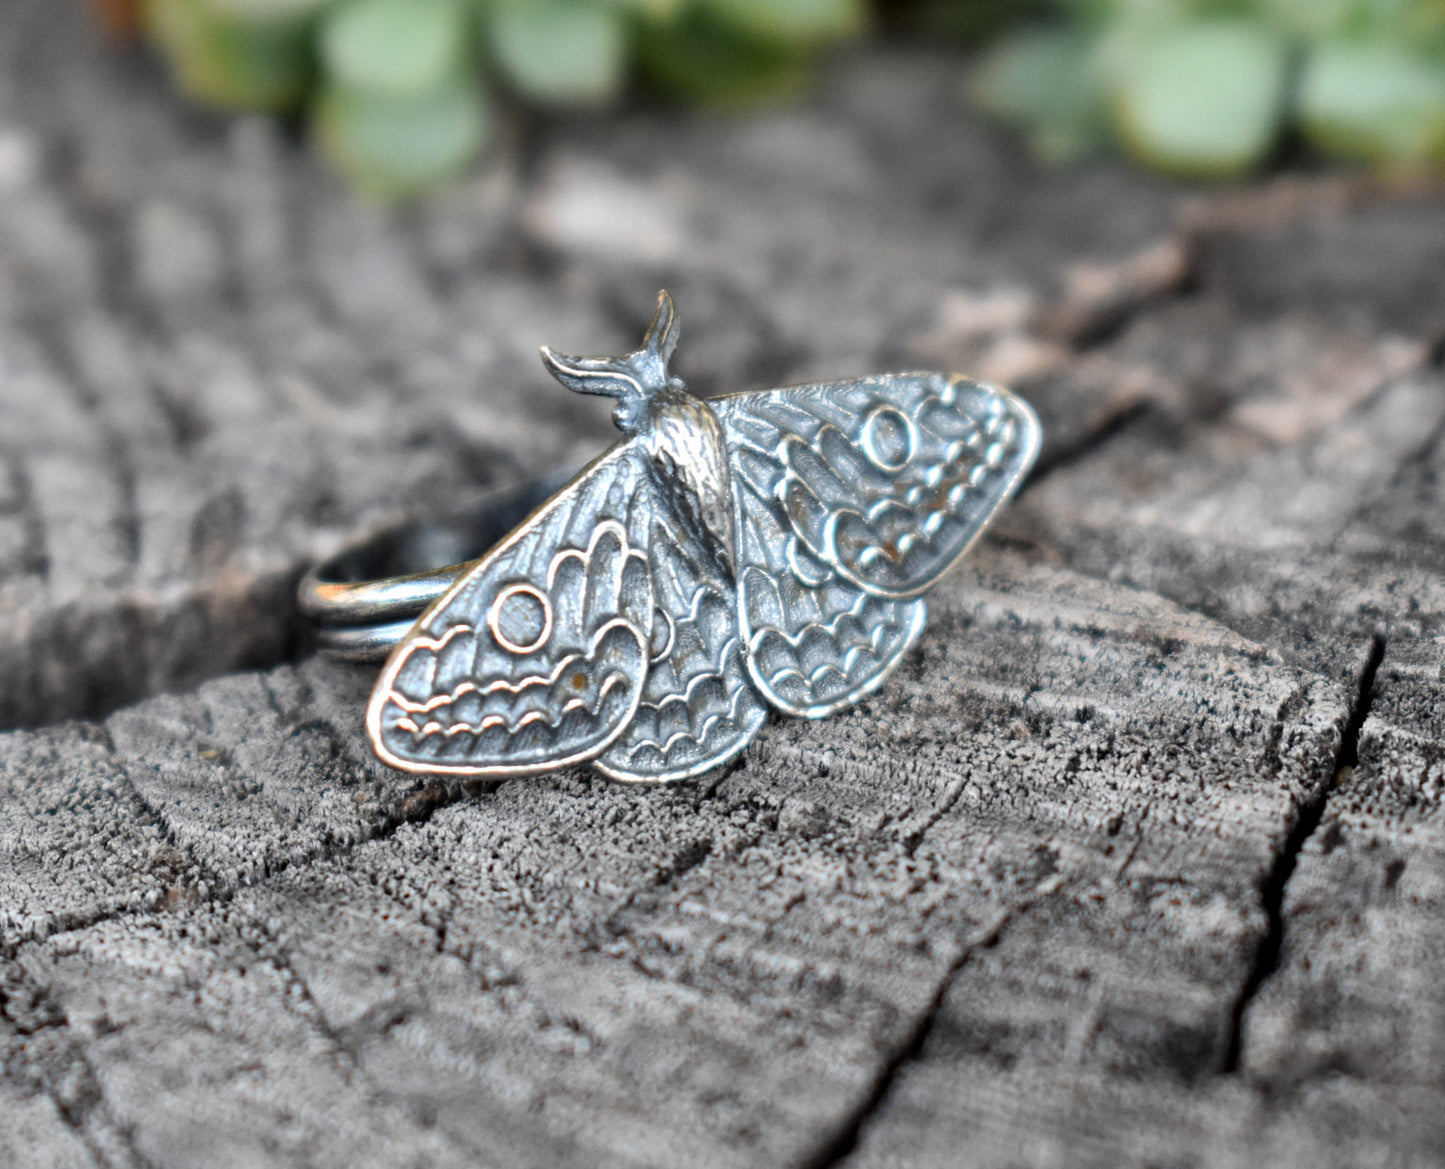 Moth Ring- Silver Moth Ring, Butterfly Ring, Gothic Ring-Statement Ring